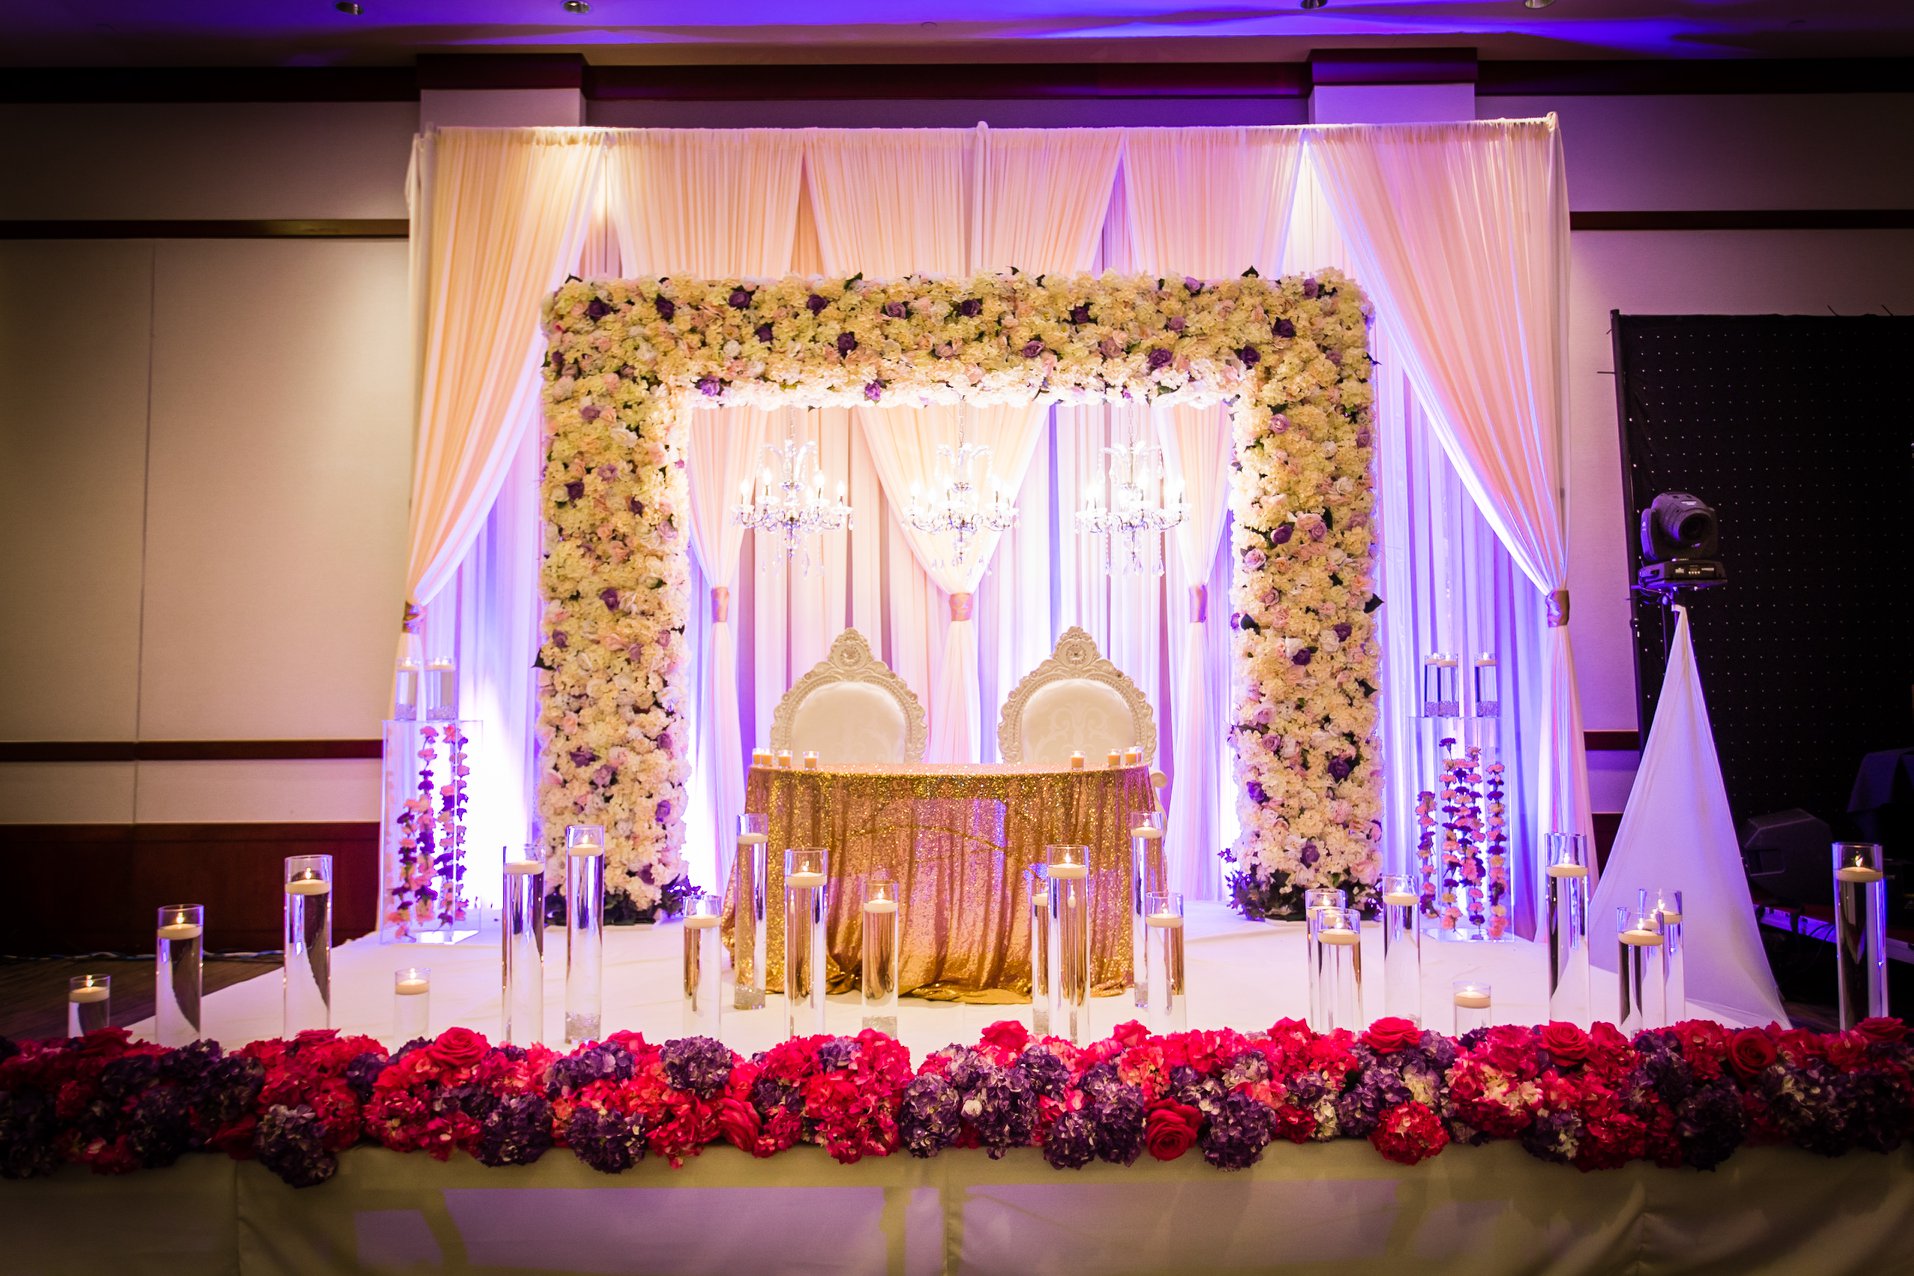 Wedding stage area with white pipe and drape, floral backdrop, and traditional decorations